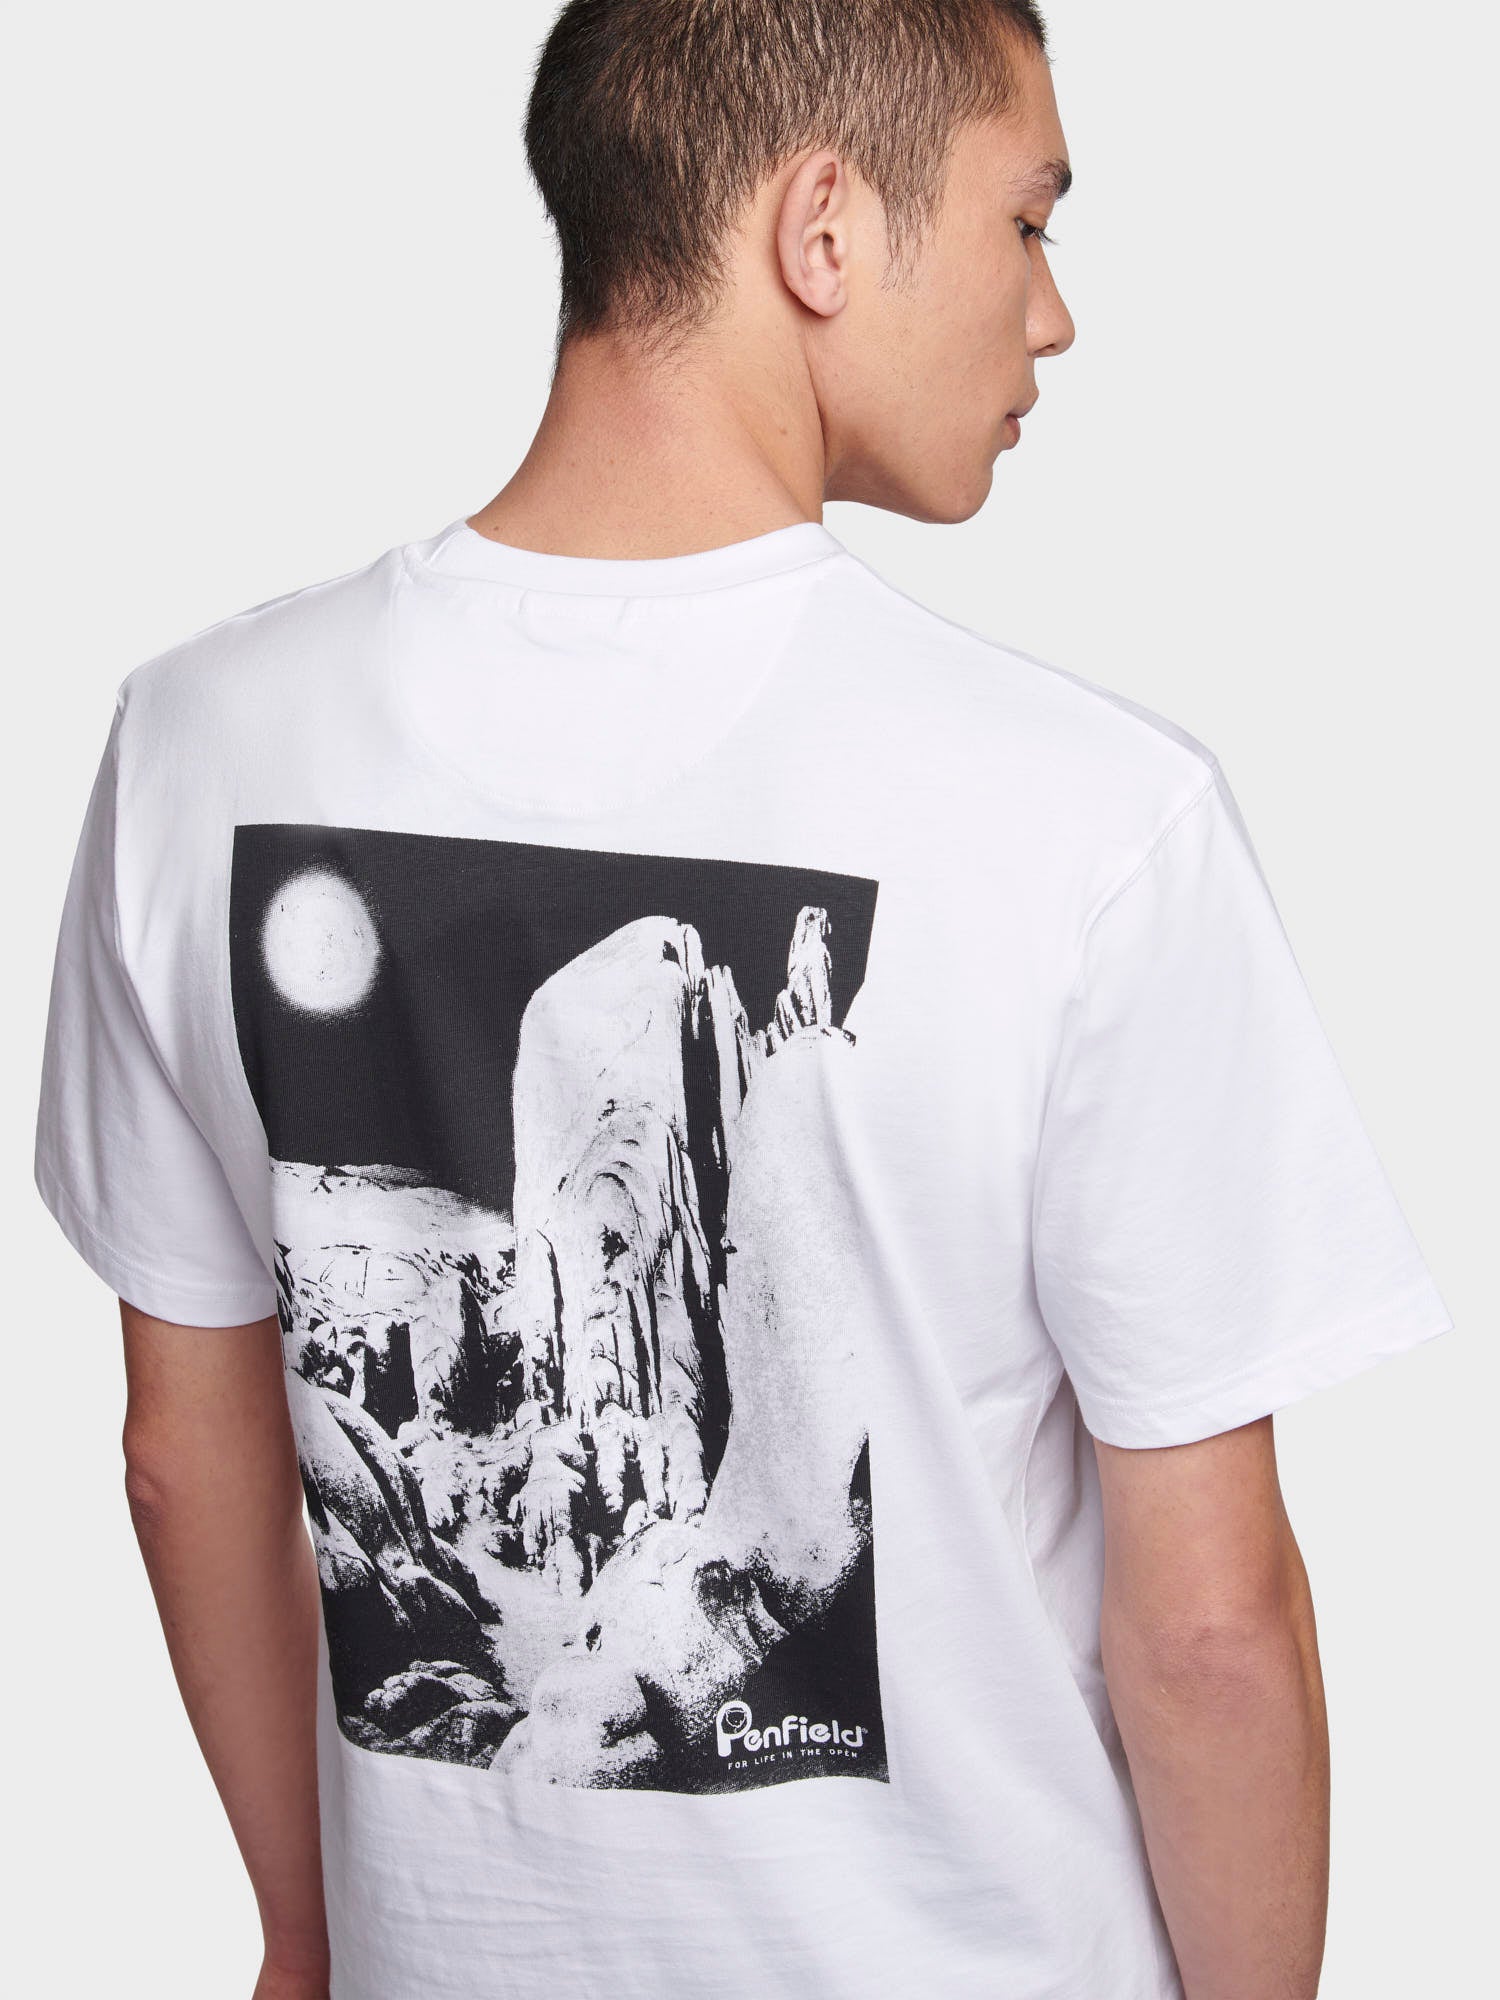 Relaxed Fit Valley T-Shirt in Bright White